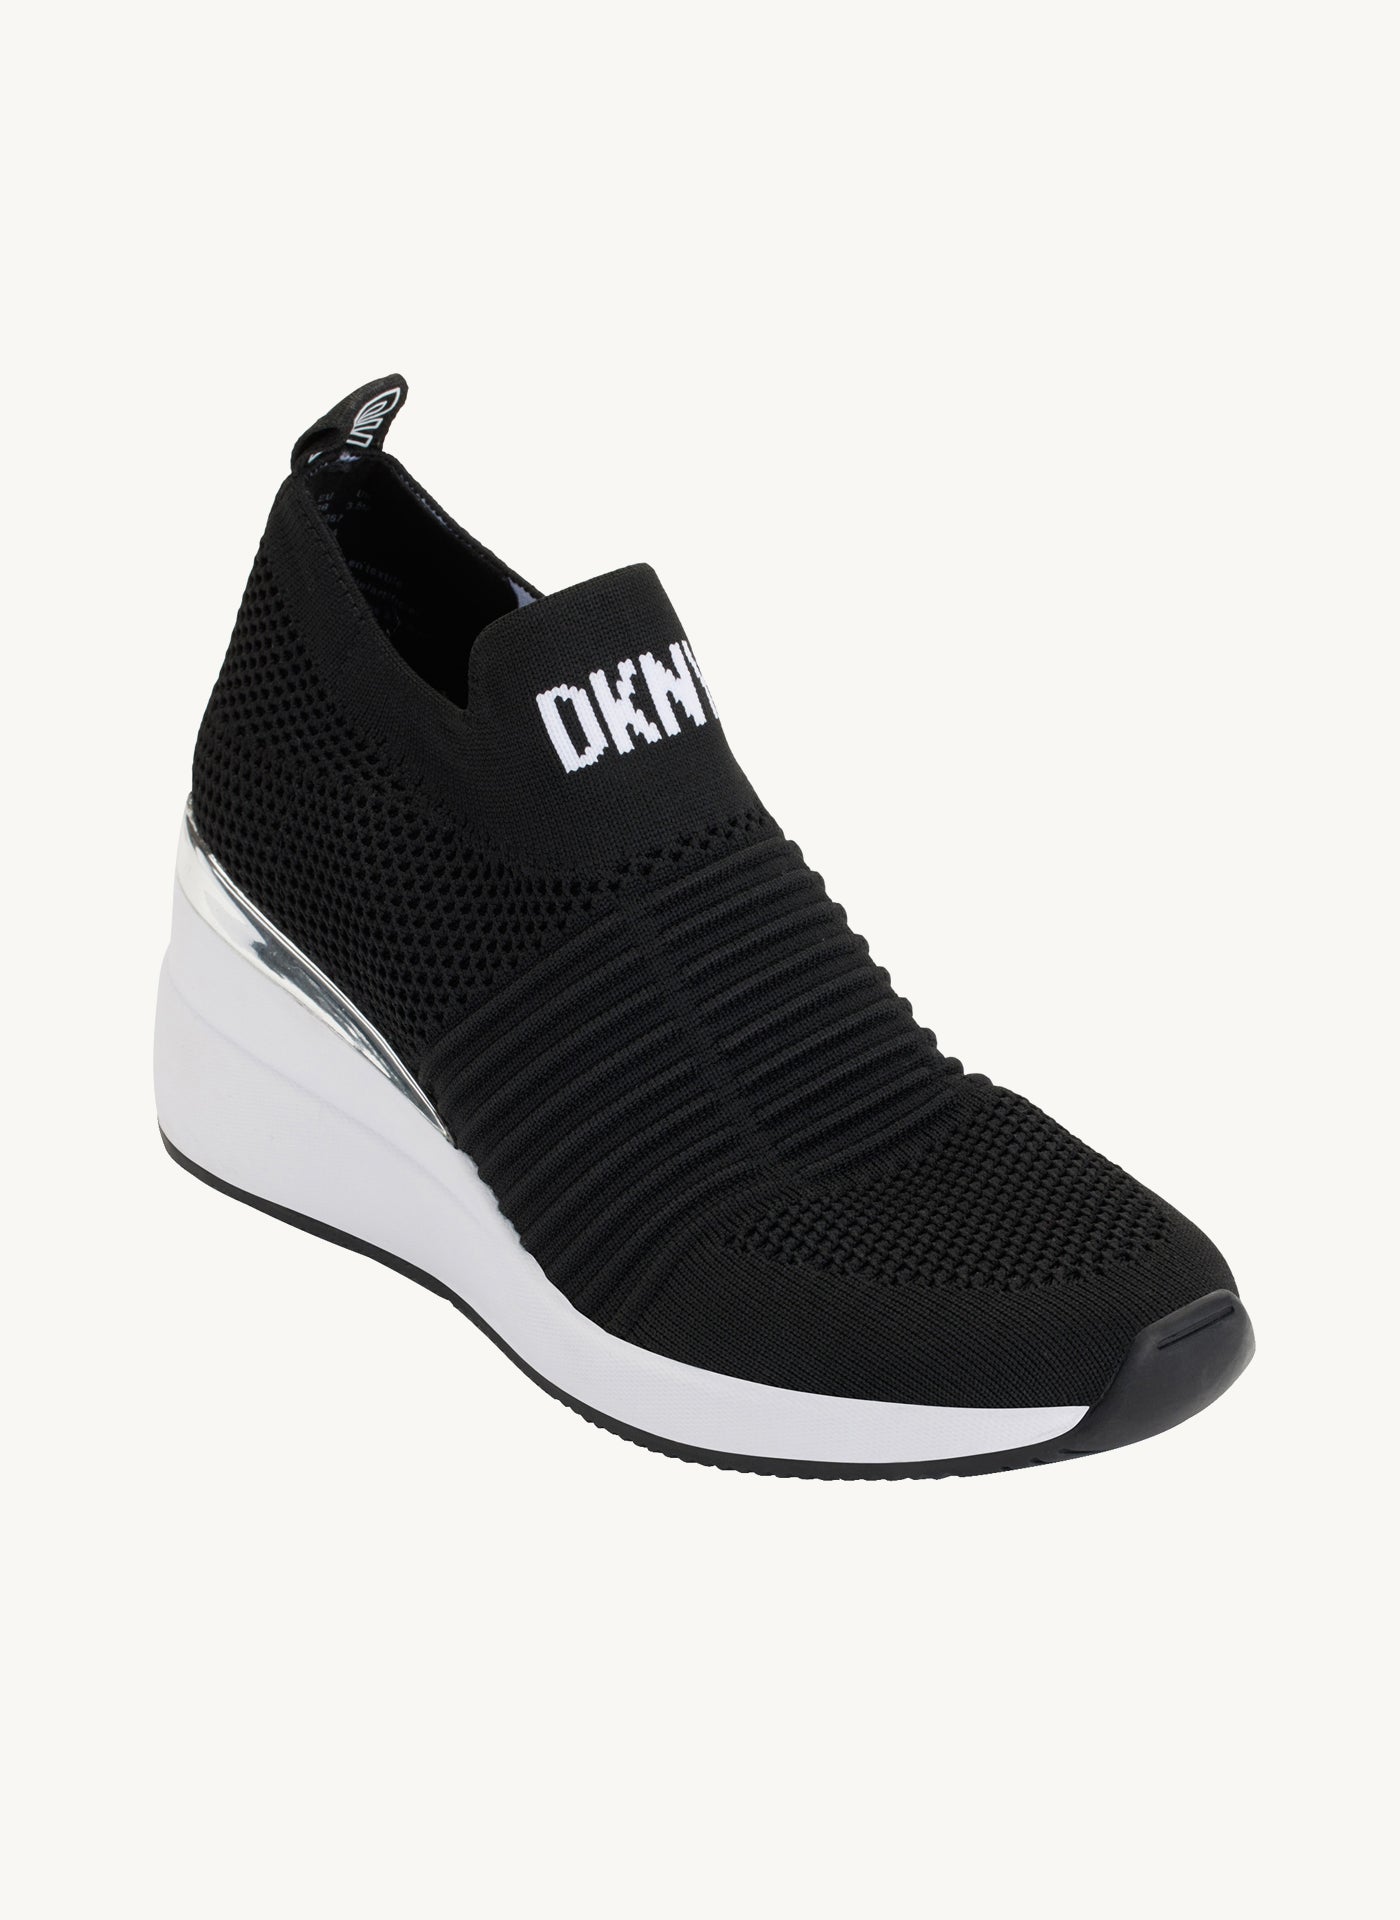 Payson - Wedges Sneakers – DKNY | Saudi Arabia Official Store